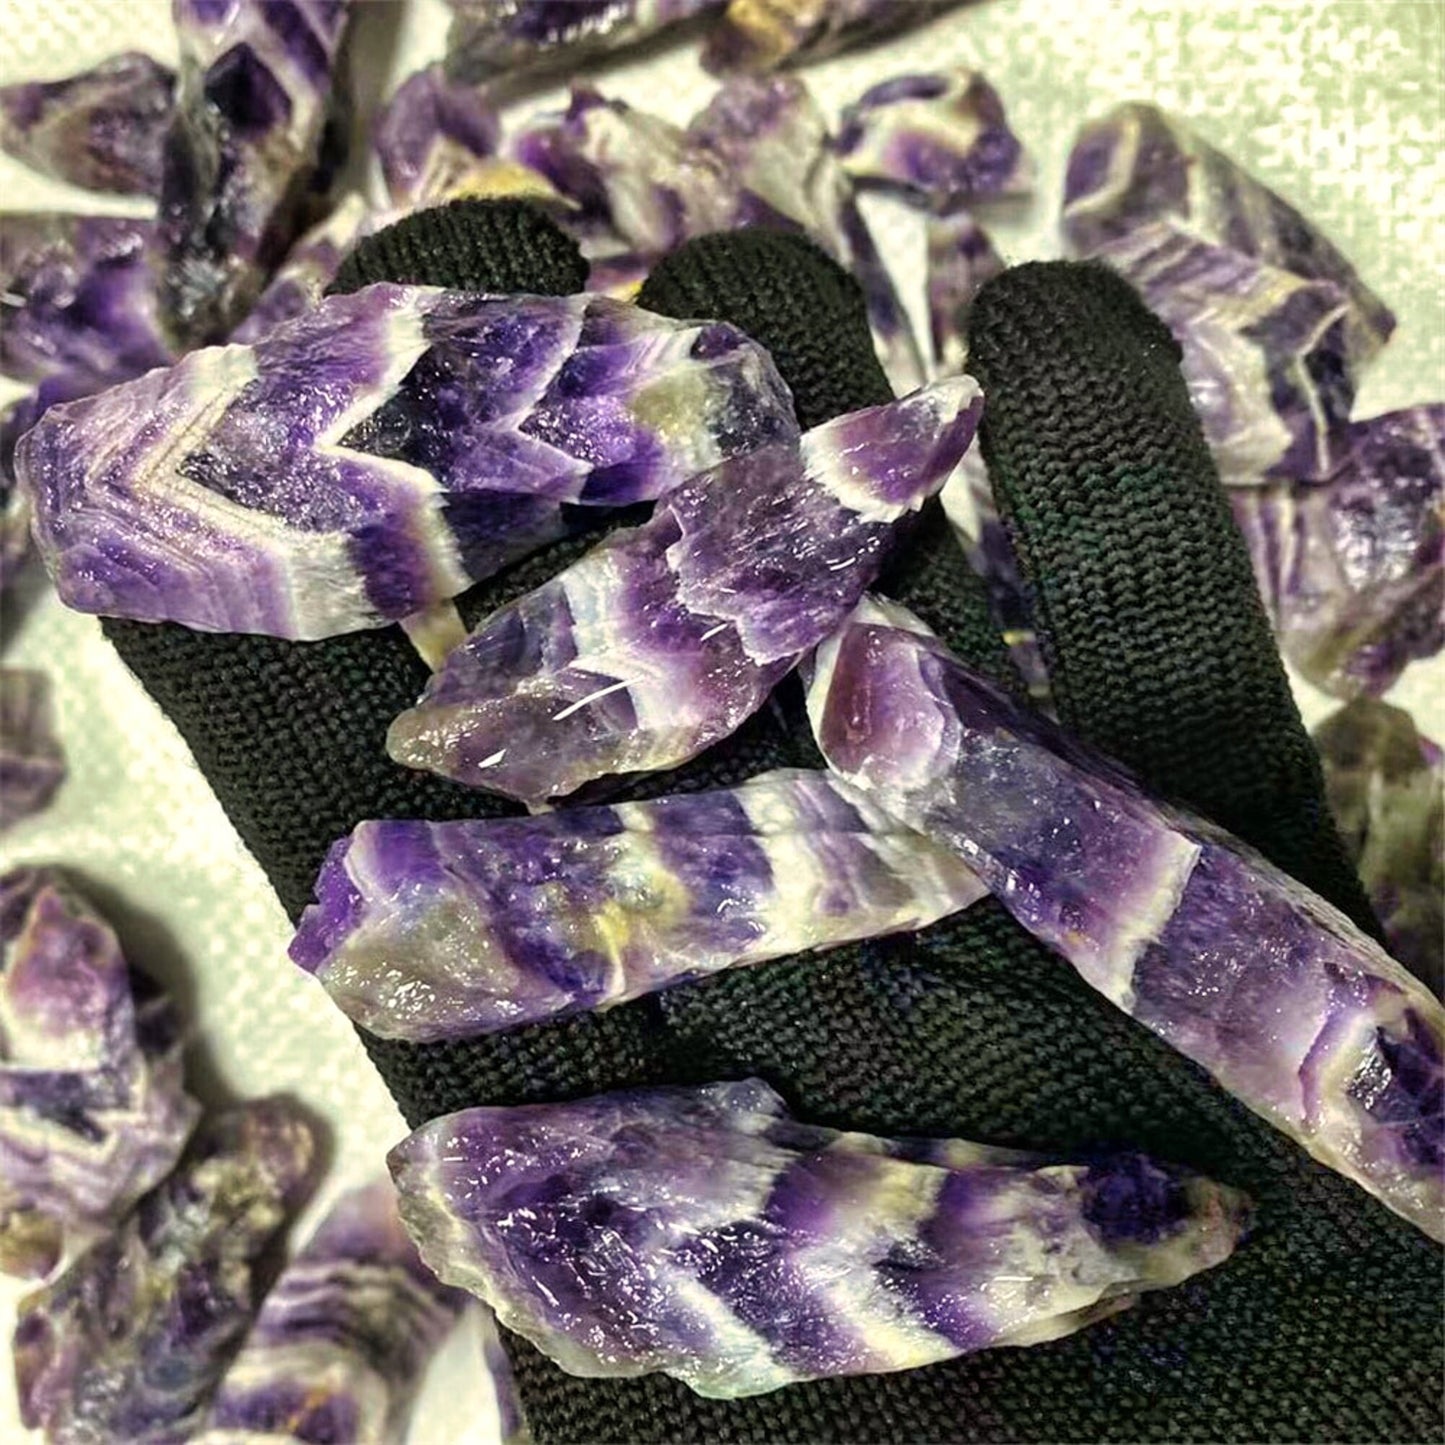 Natural Amethyst Crystal Rough Stone for Energy Healing & Mineral Specimen